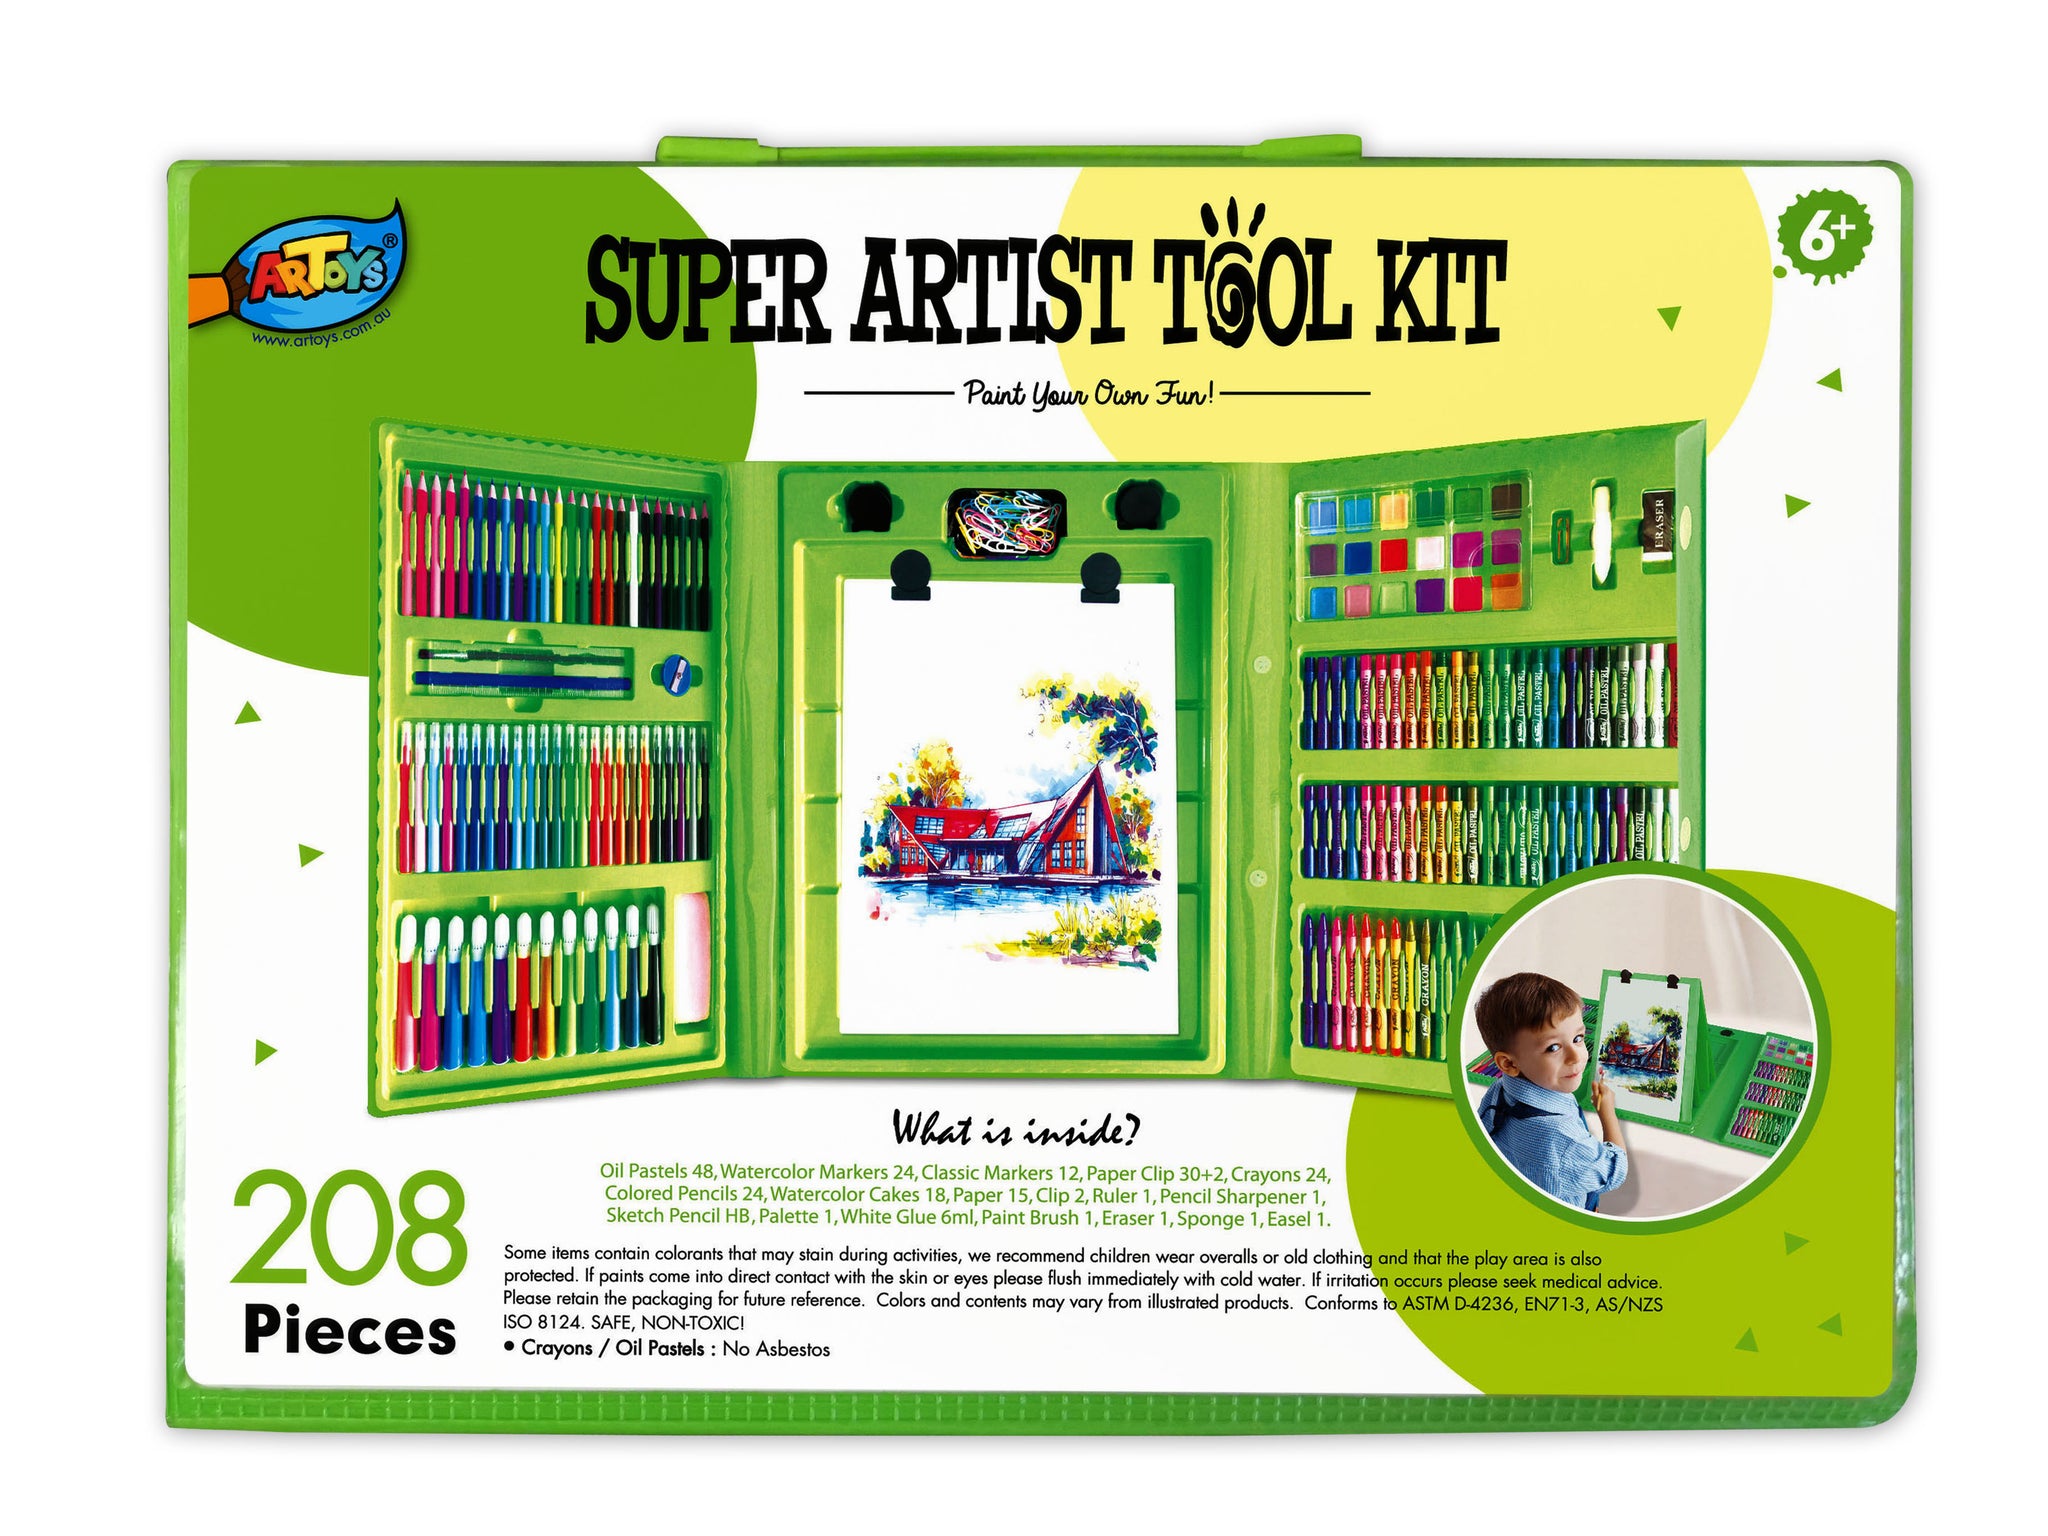 Finger Painting Fun: Easel Coloring Book with 6 Paints (Novelty